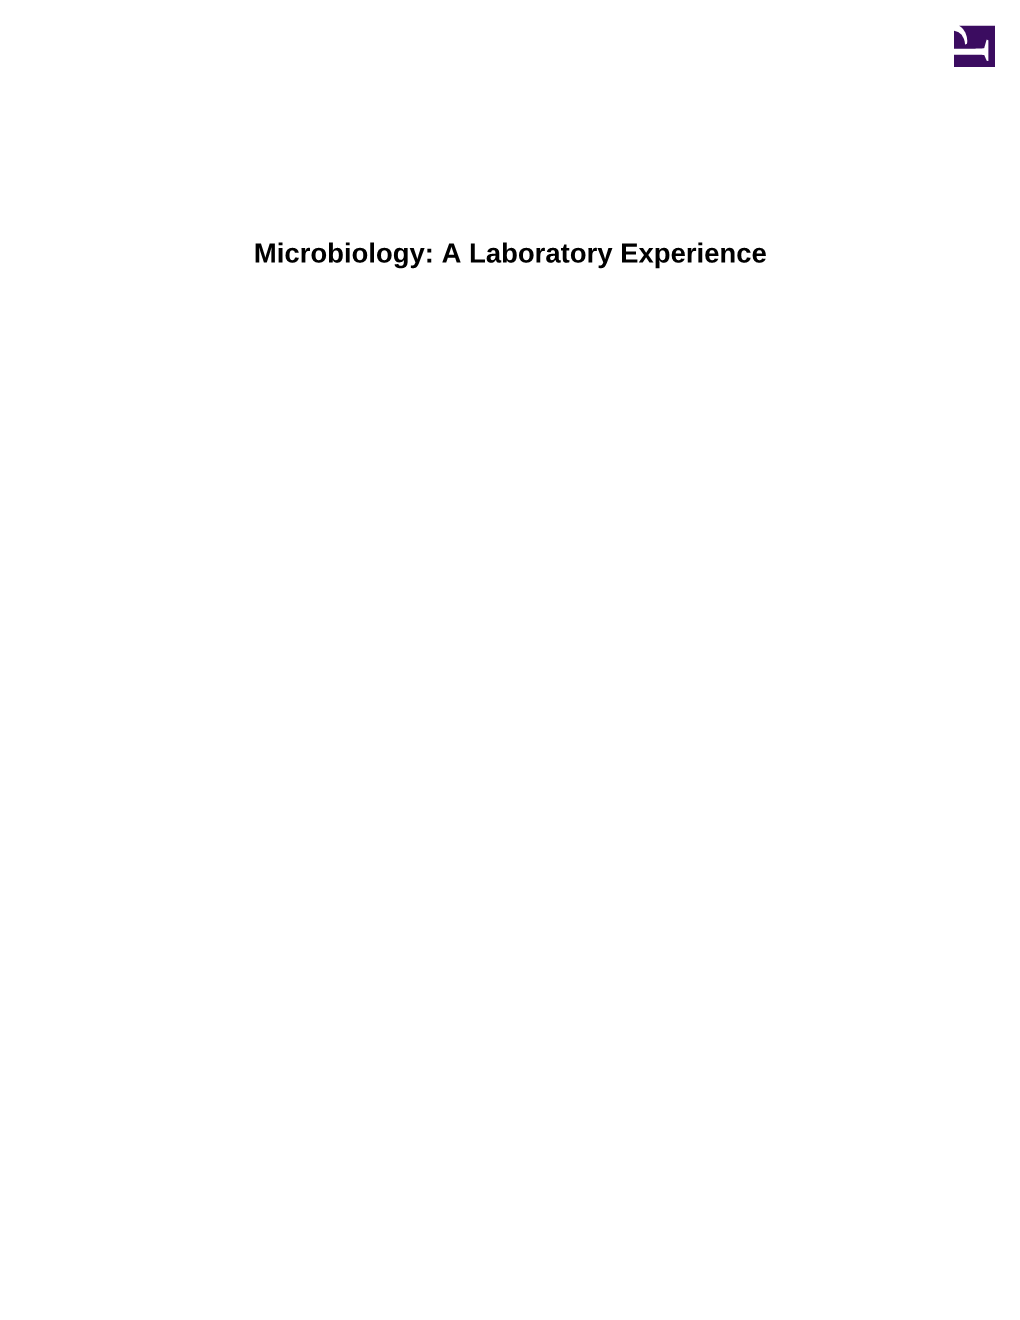 Microbiology: a Laboratory Experience